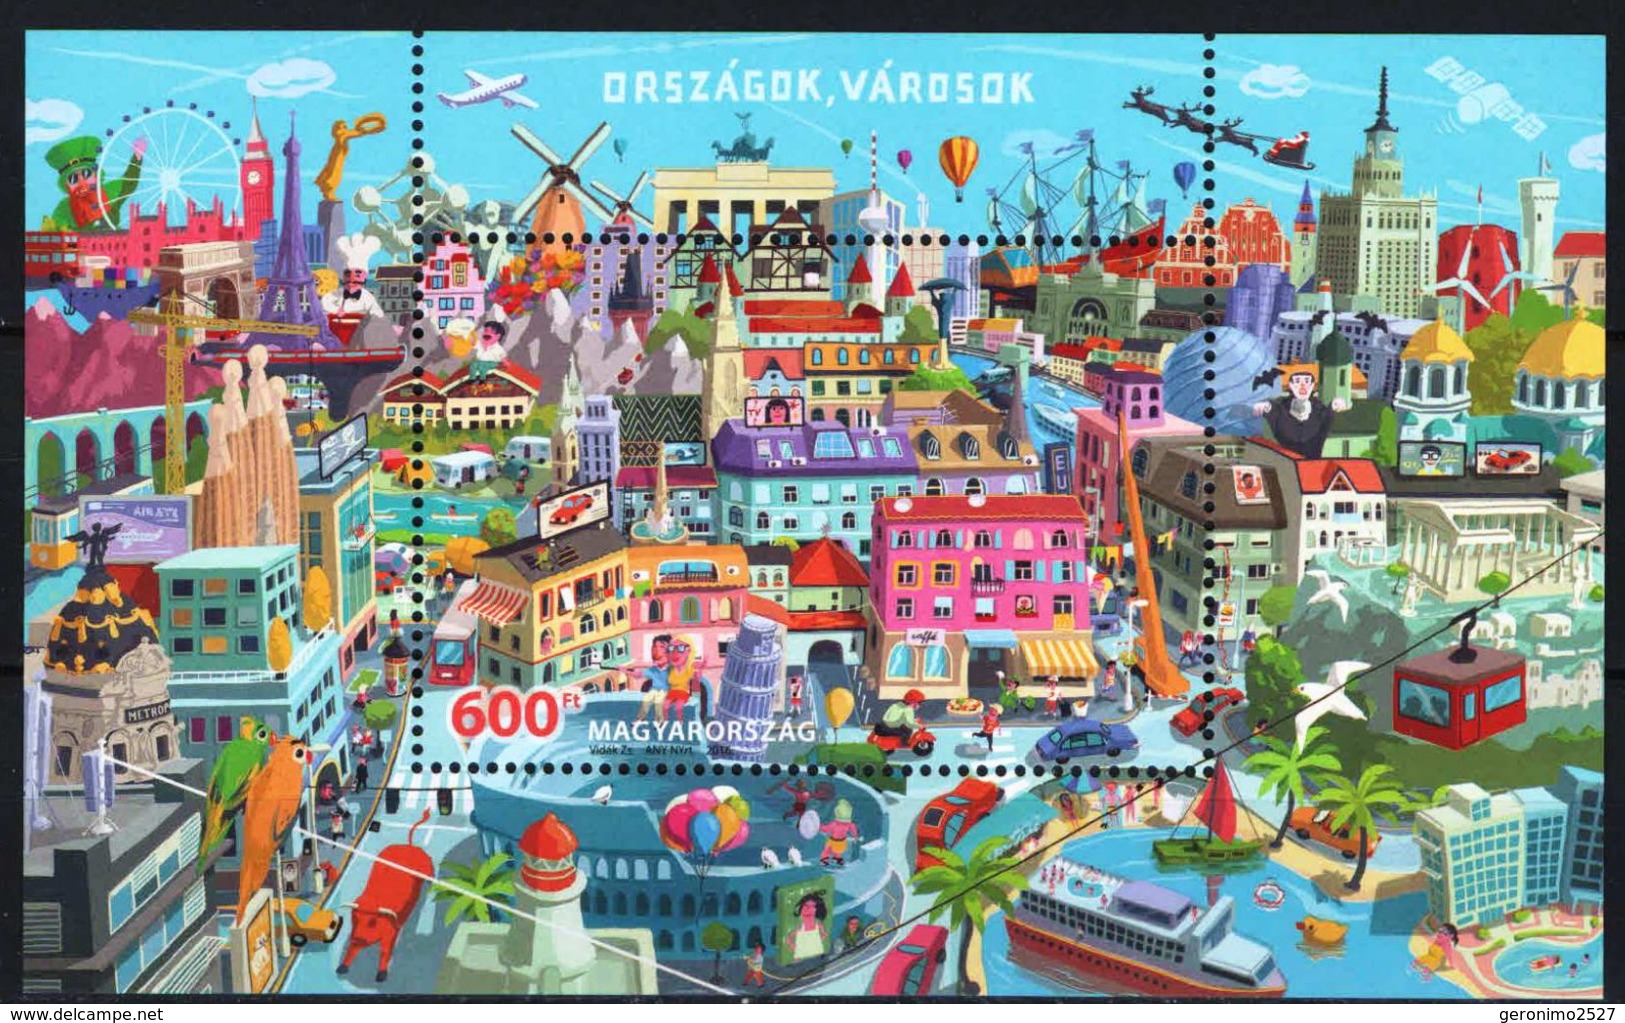 HUNGARY 2016 CULTURE Countries & Cities Of EUROPEAN UNION - Fine S/S MNH - Nuevos